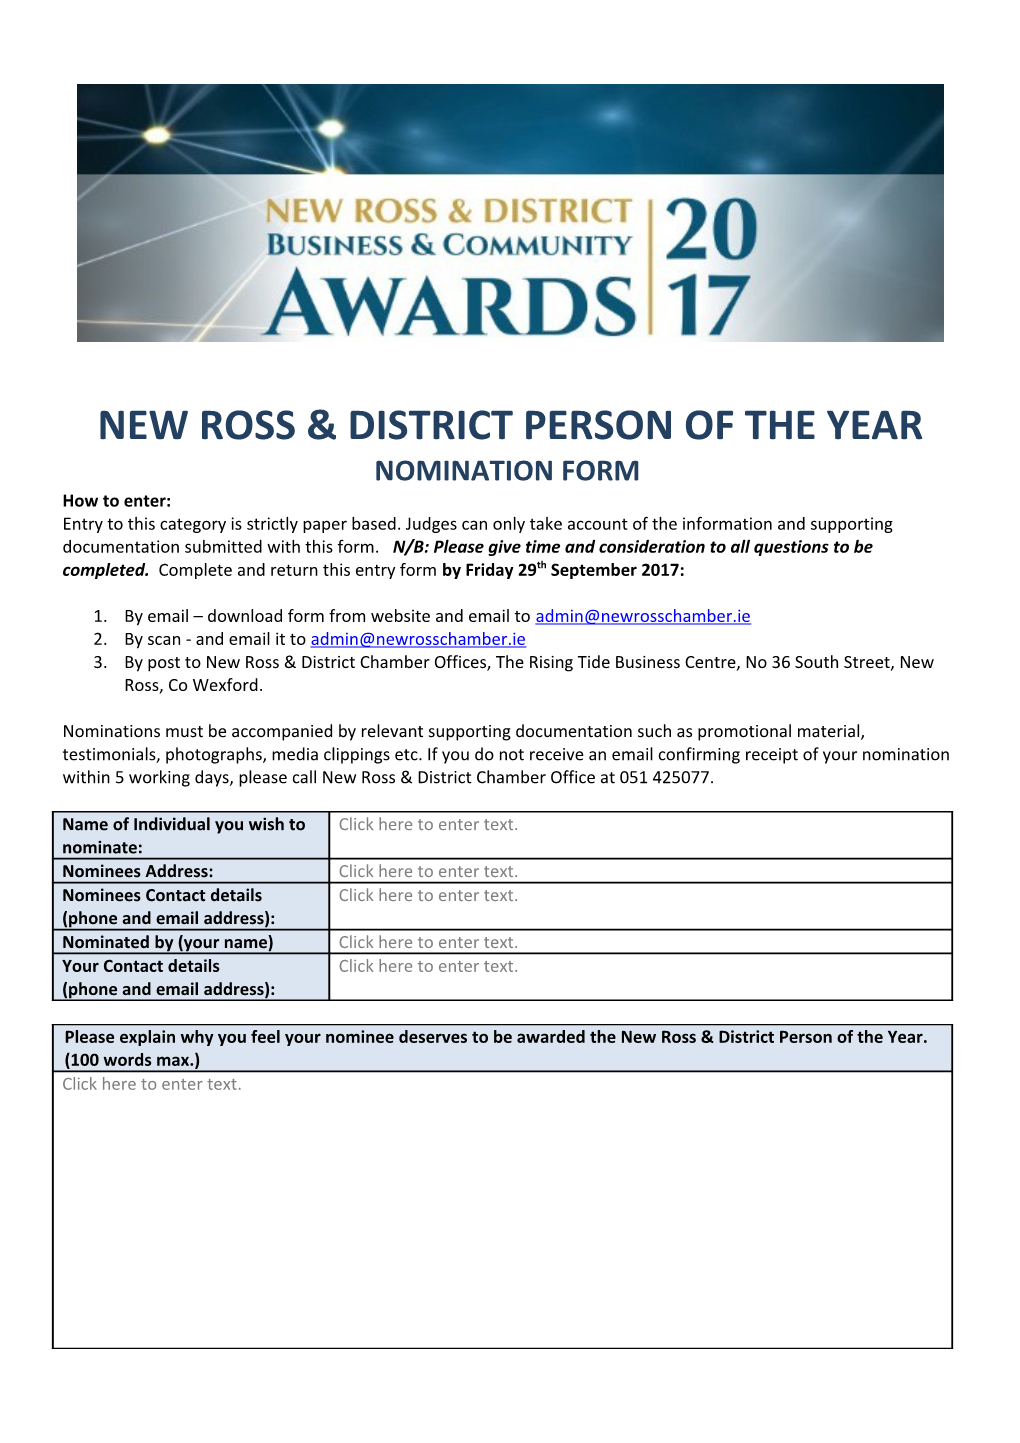 New Ross & Districtperson of the Year